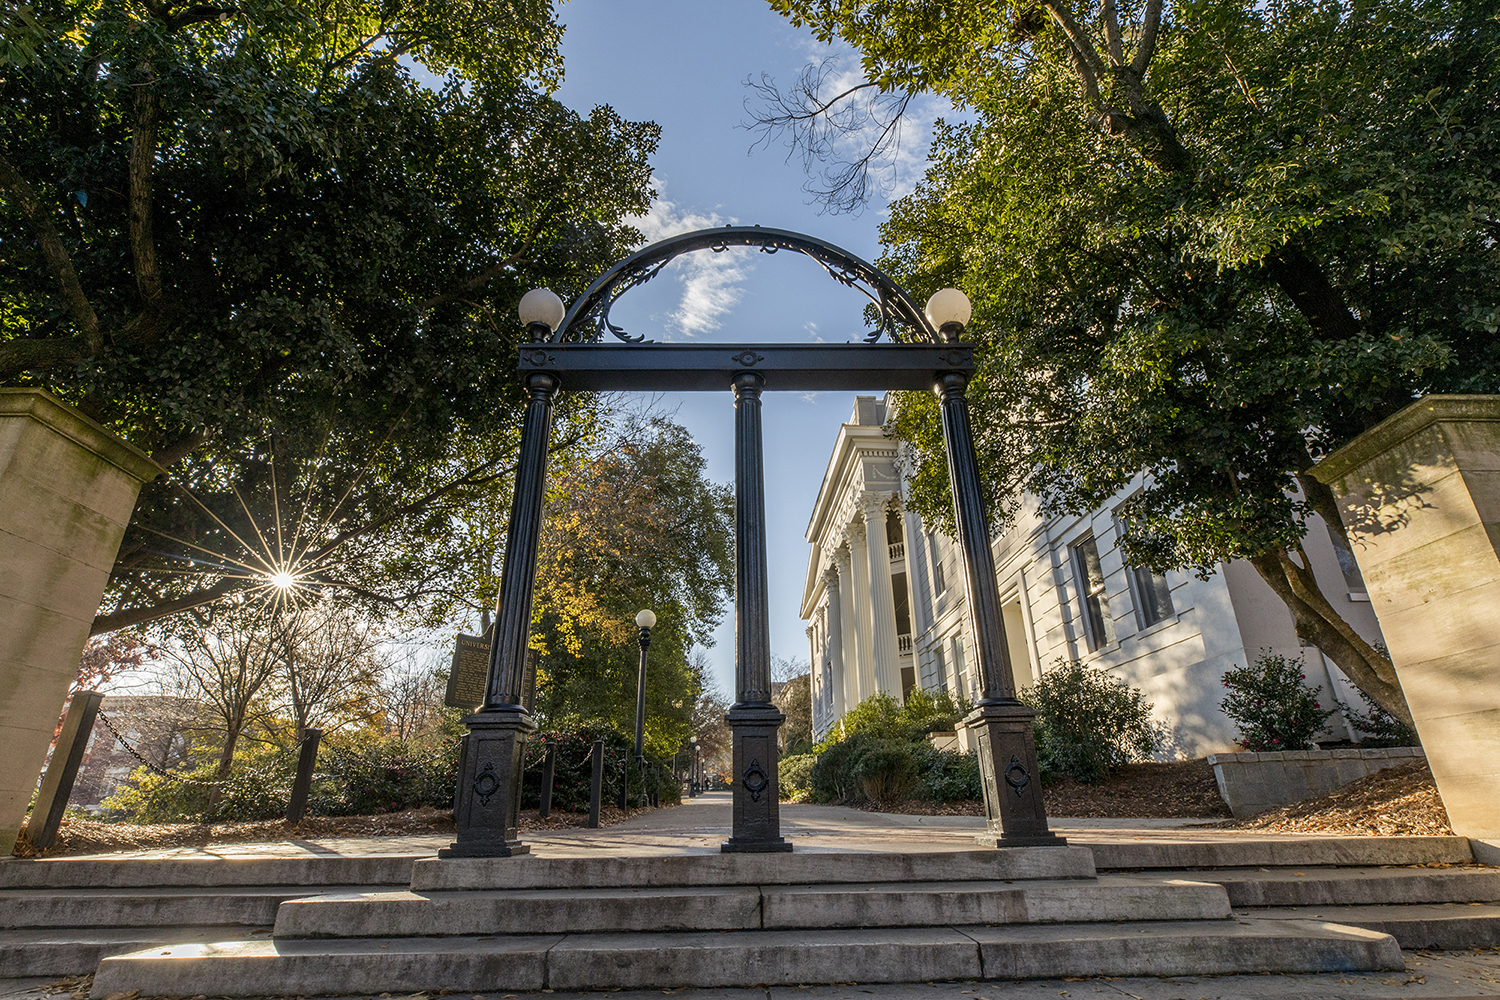 Photo of the UGA Arch with green trees surrounding it and a sunburst. 